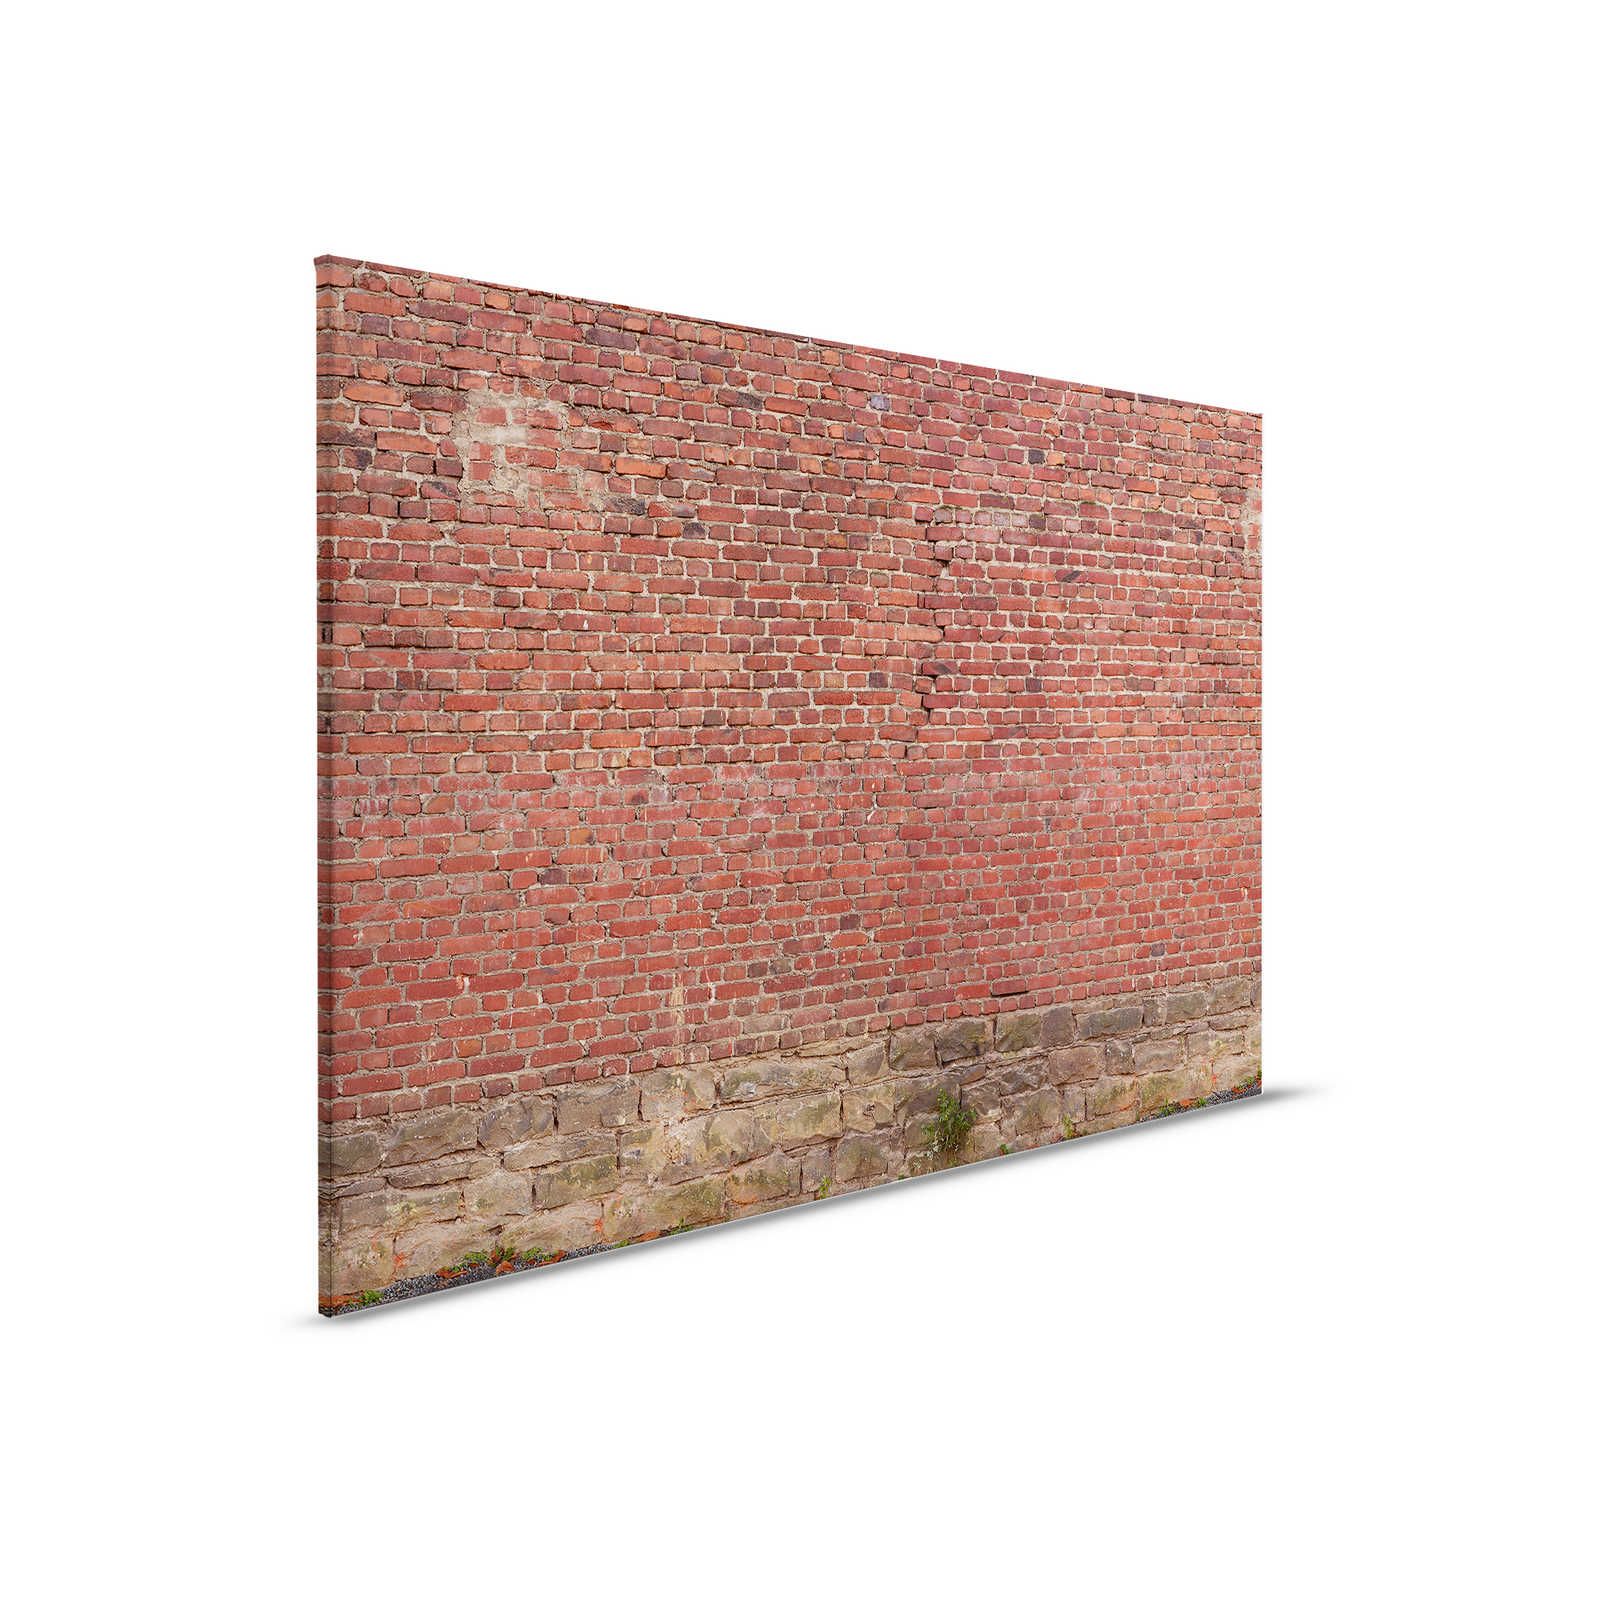         Canvas painting red brick wall - 0,90 m x 0,60 m
    